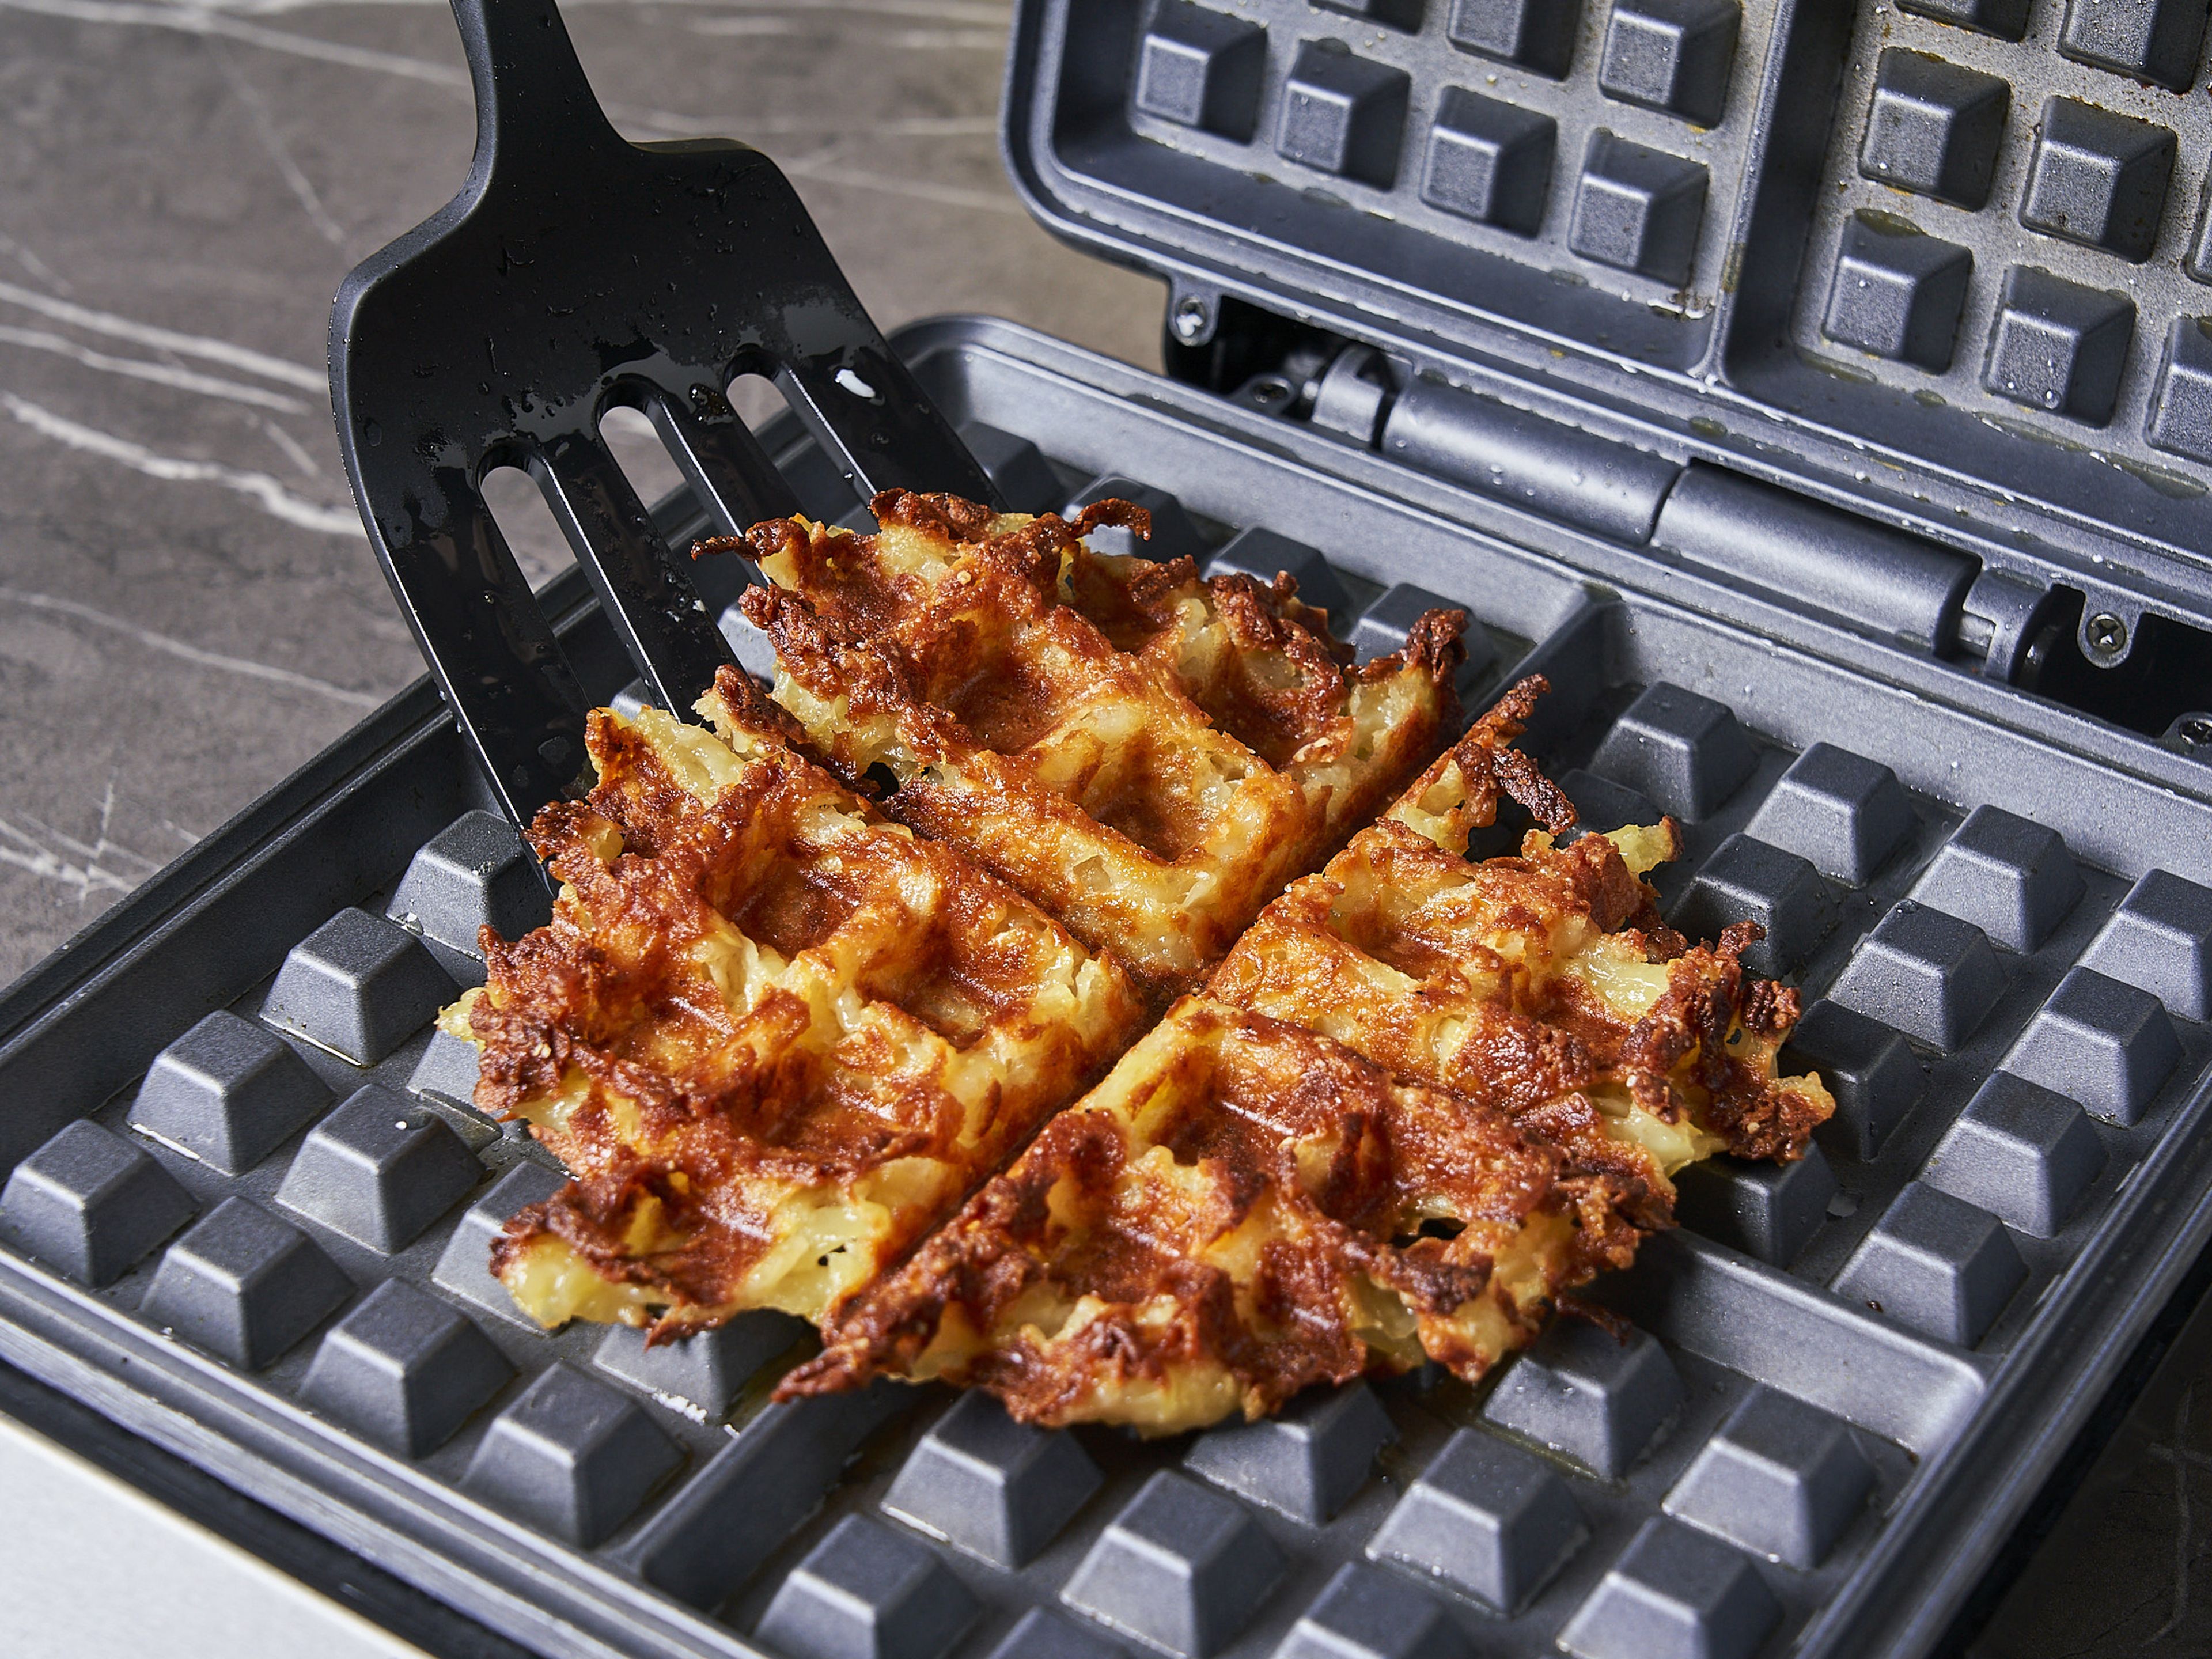 Once the waffles are cooked, remove them from the waffle iron and place them on a plate. Top each waffle with 2 strips of bacon, cornichons, and a fried egg. Season with salt and pepper, garnish with chives. Serve immediately with the paprika mayonnaise.